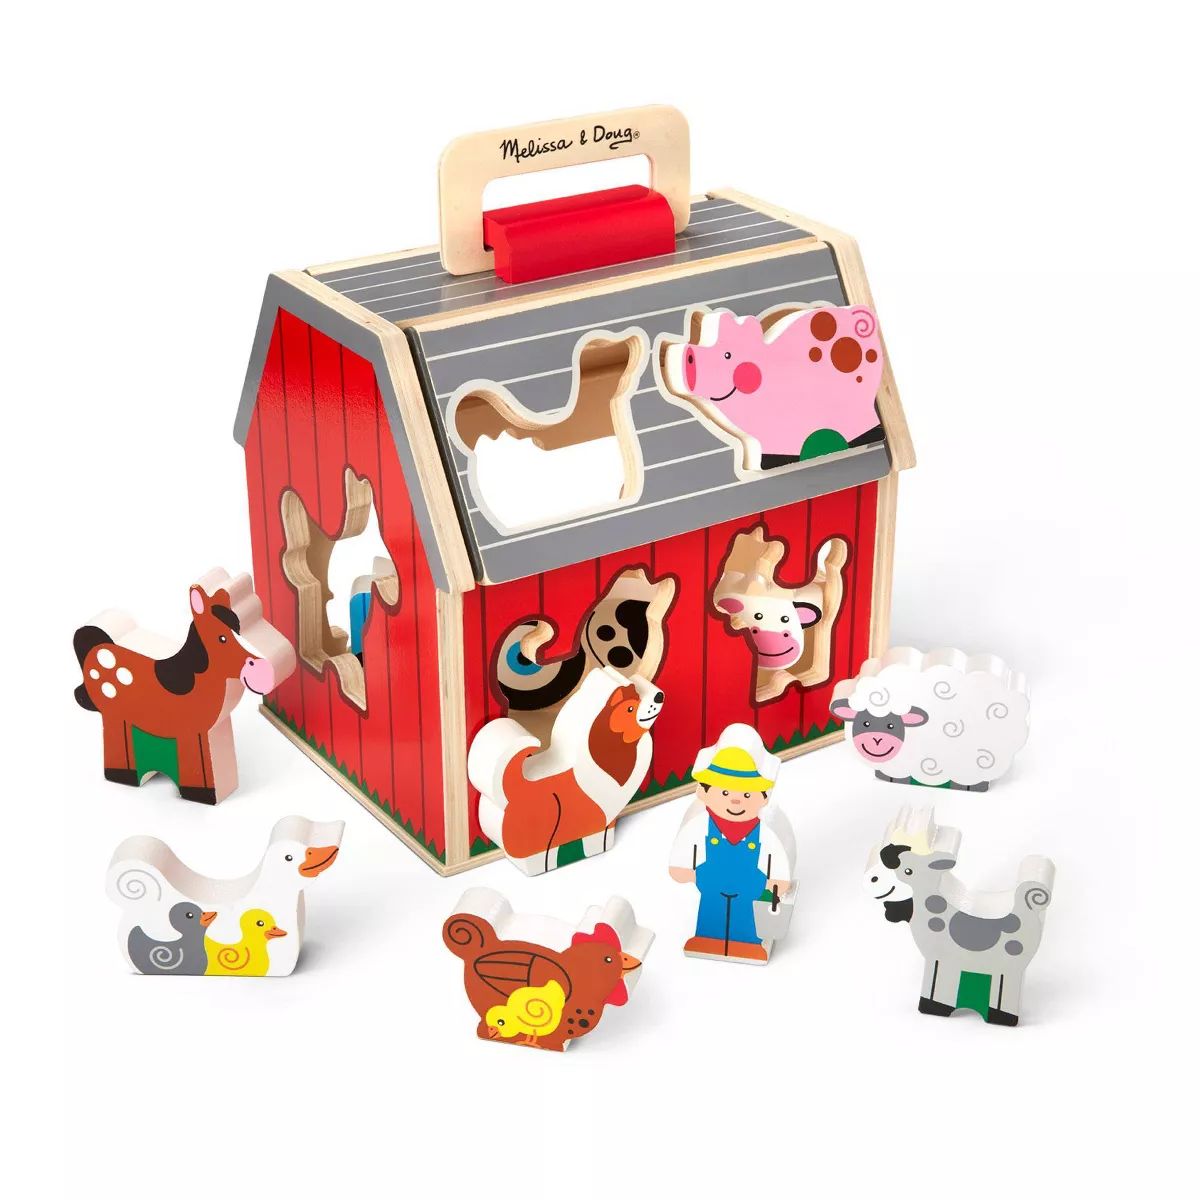 Melissa & Doug Wooden Take-Along Sorting Barn Toy with Flip-Up Roof and Handle - 10pc Wooden Farm | Target